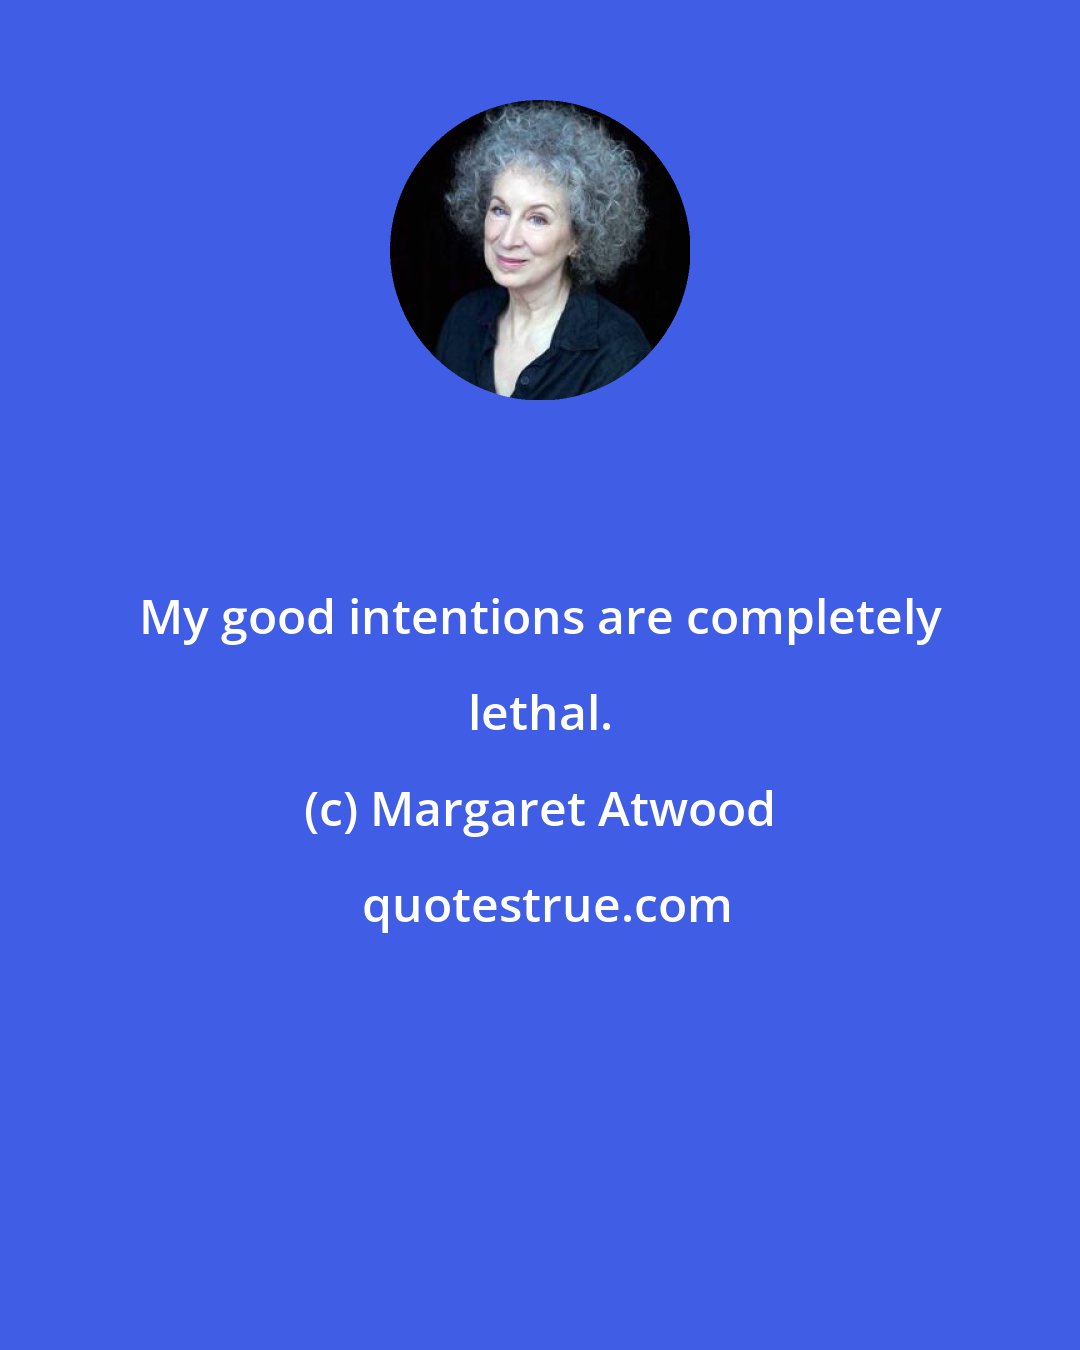 Margaret Atwood: My good intentions are completely lethal.